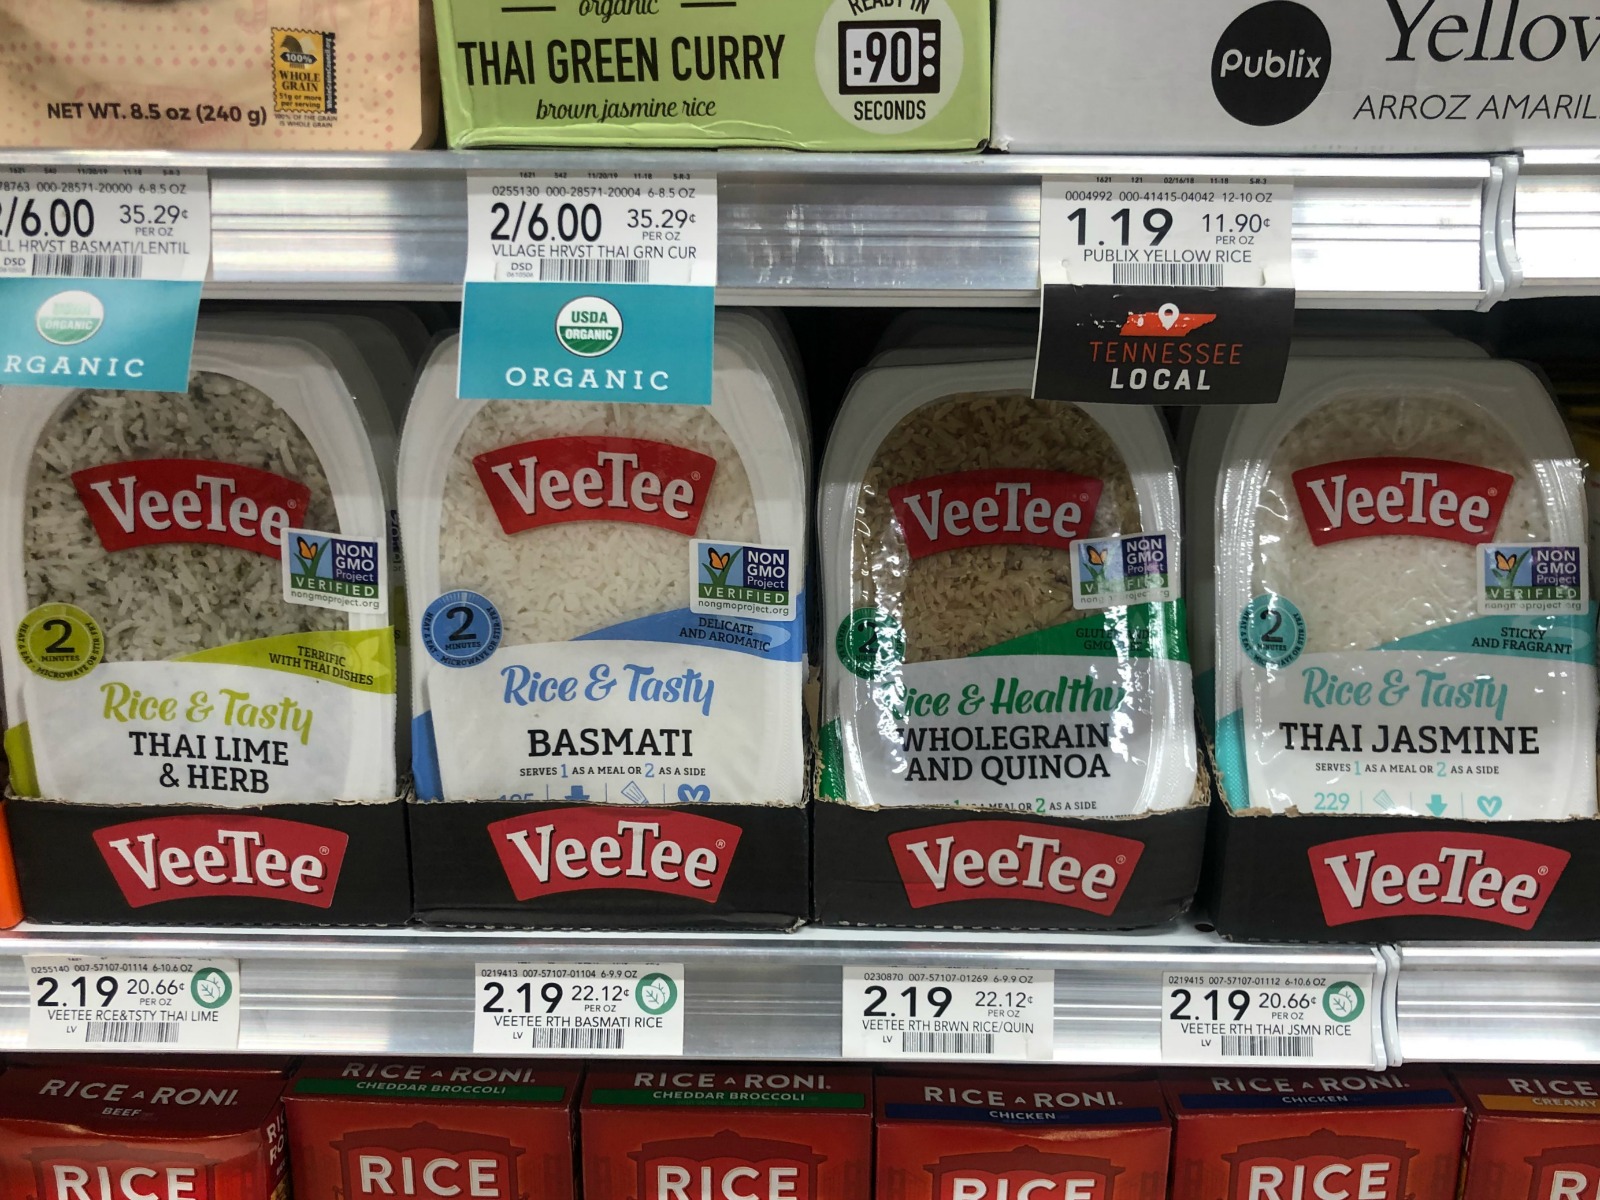 Veetee Rice At Publix - Stock Up For The Holidays! on I Heart Publix